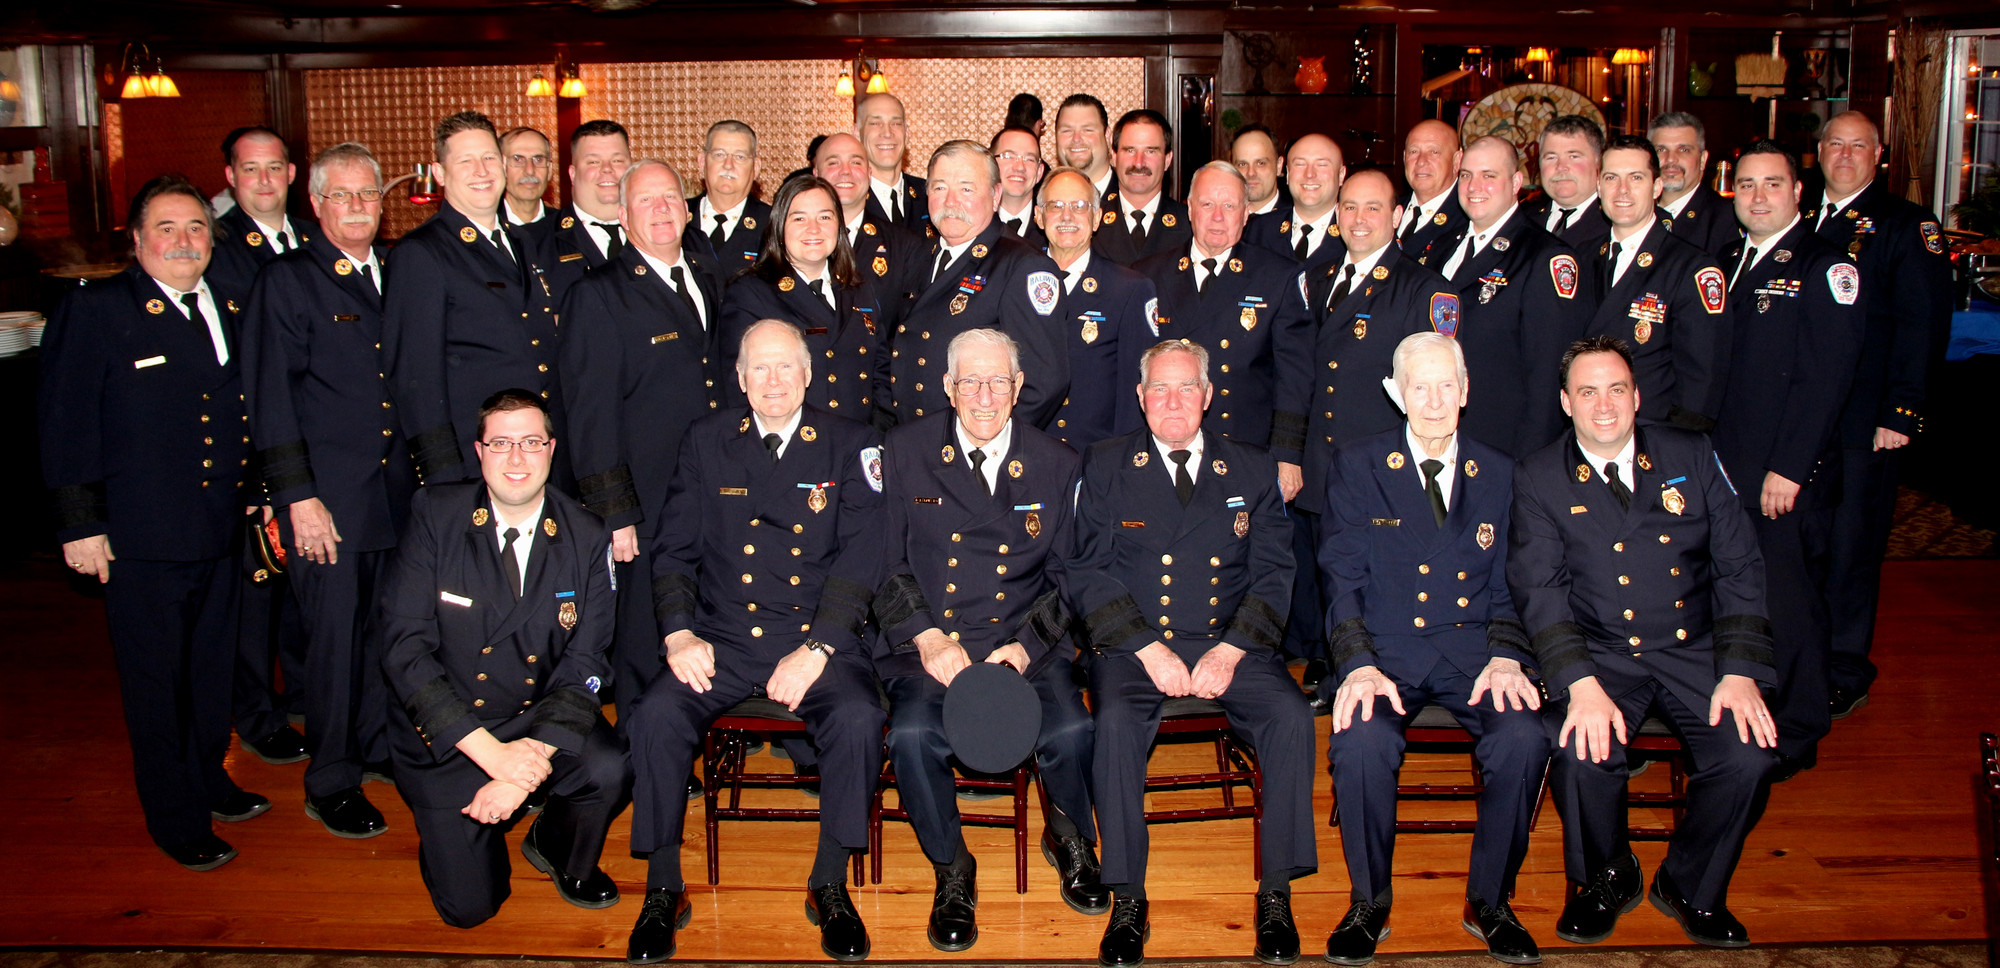 the Baldwin Fire Department held its 119th annual Installation Dinner on April 5. The department’s past and current chiefs were recognized for their many years of service.